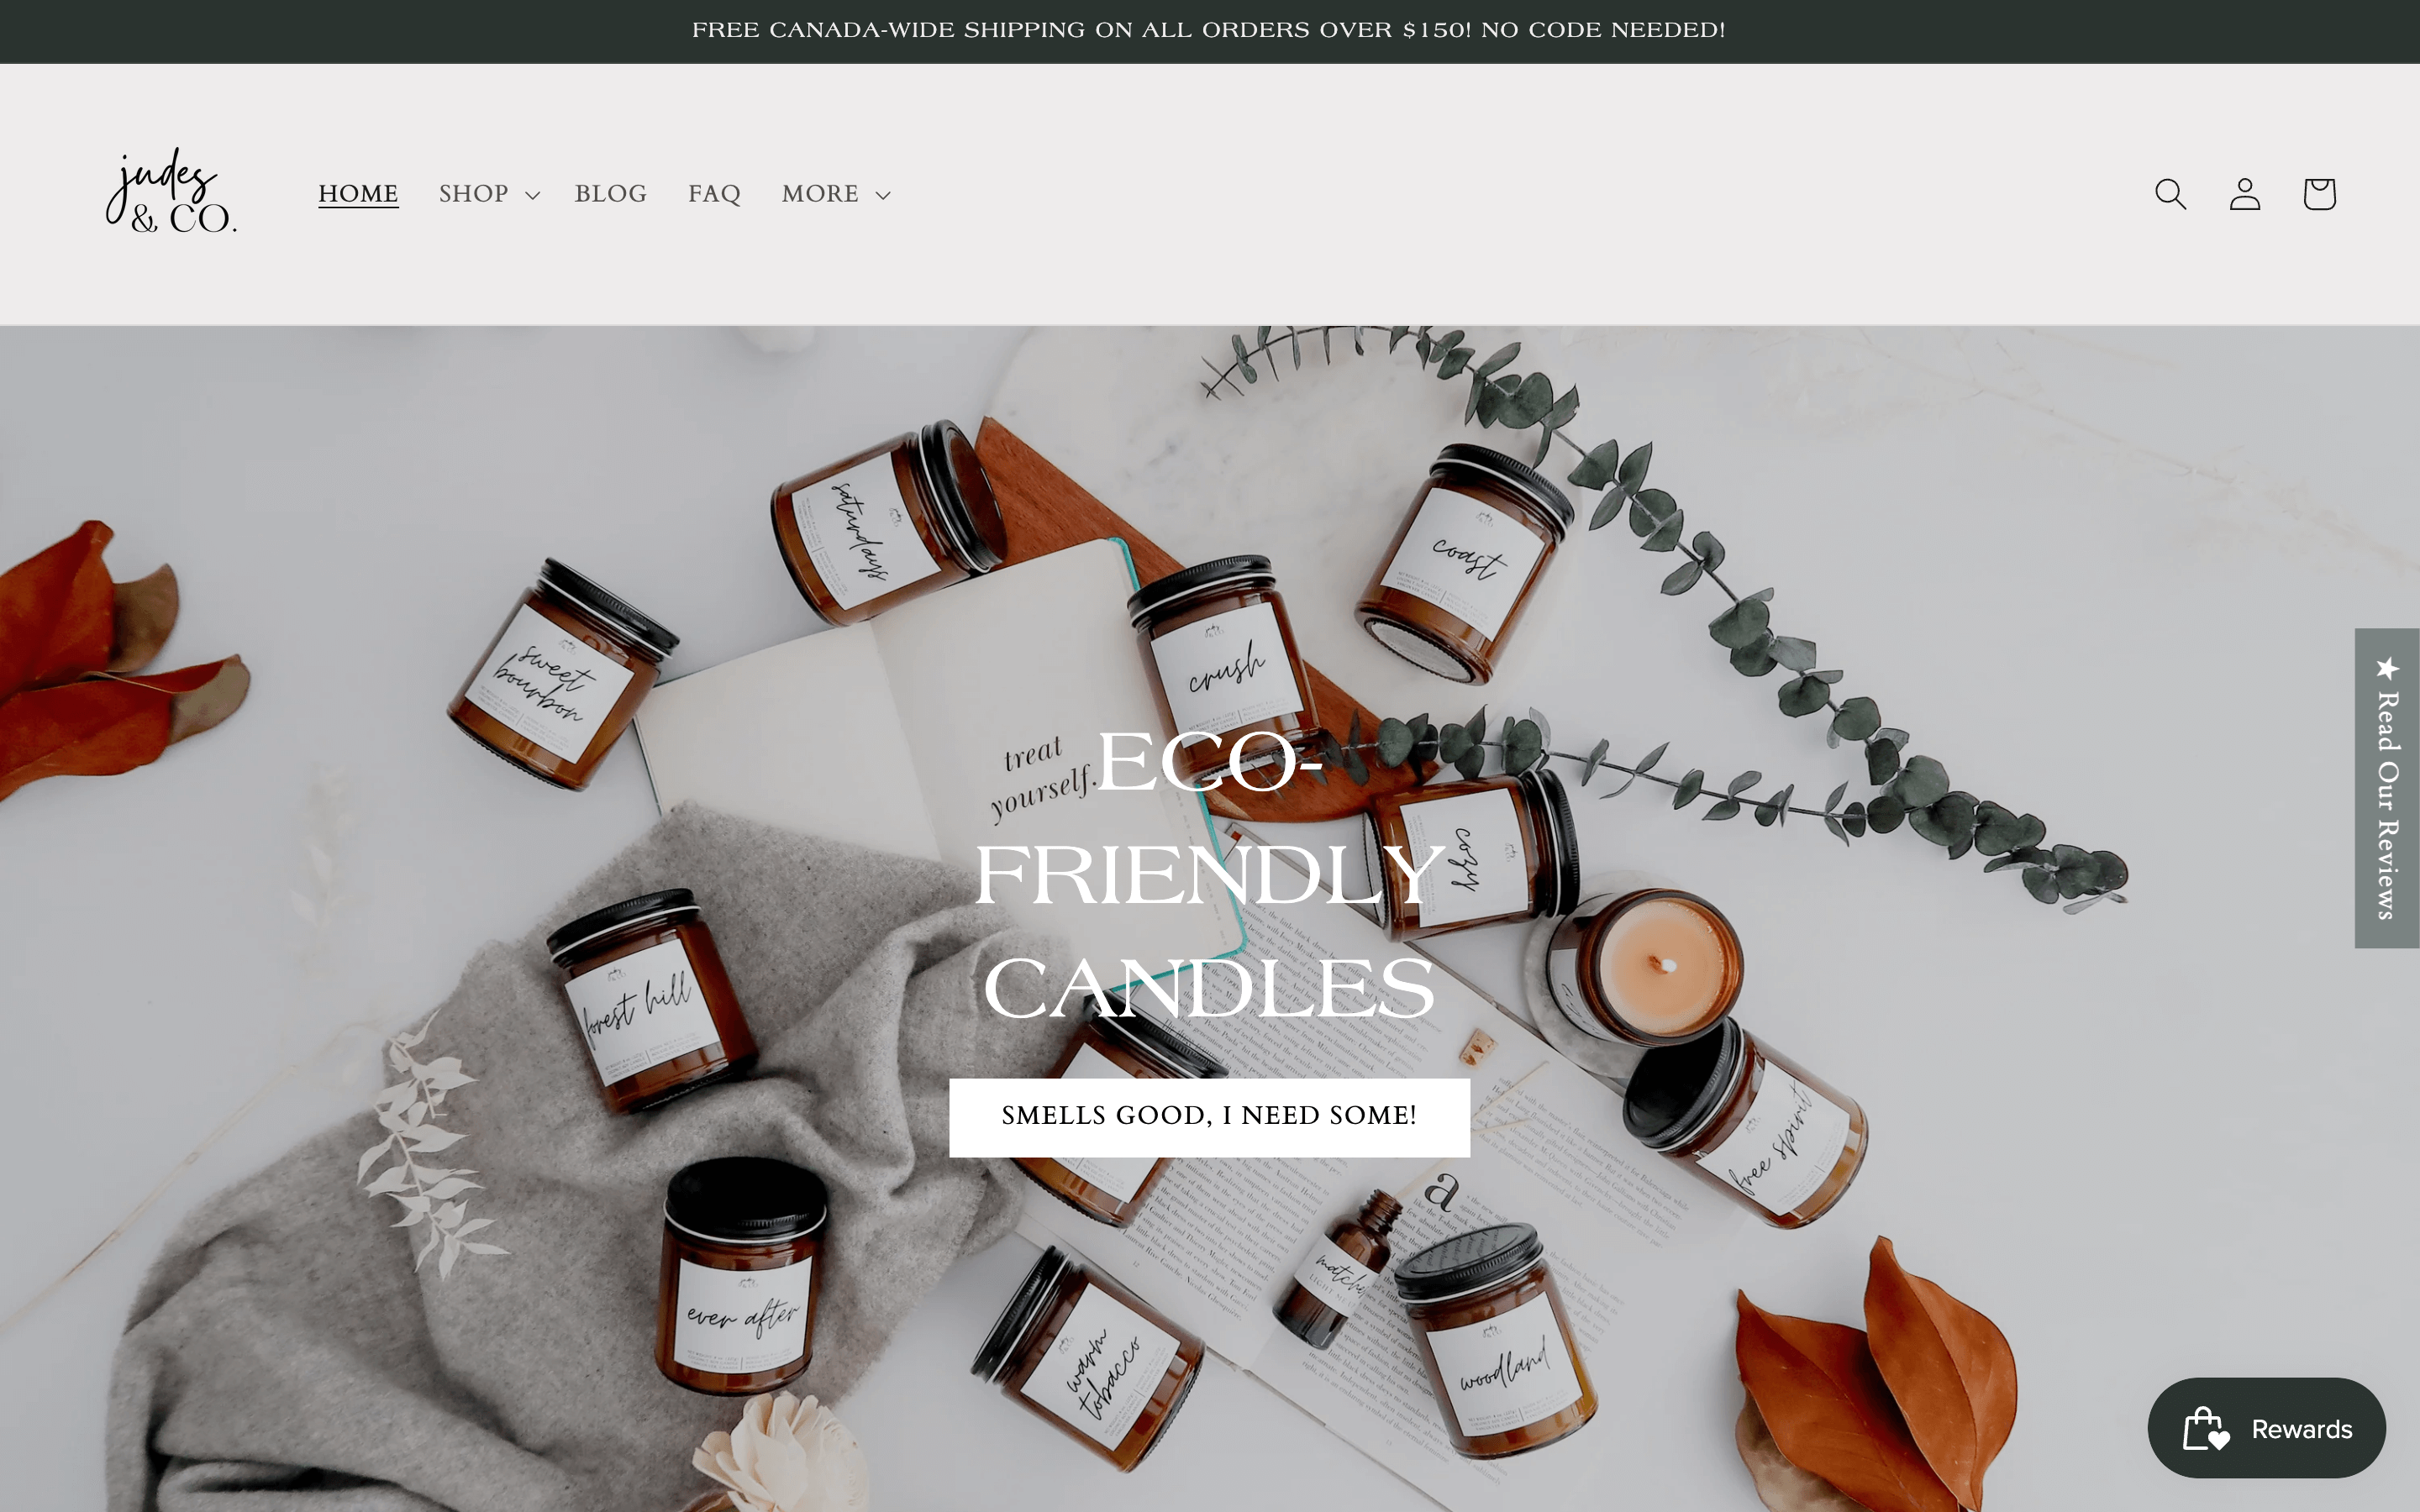 Women Ecommerce Entrepreneurs–A screenshot from Judes & Co. homepage. There is a background image of several candles laying on a white surface surrounded by books, blankets, foliage, and plants. The text on top reads, “Eco-Friendly Candles. Smells GOOD, I Need Some!!!”